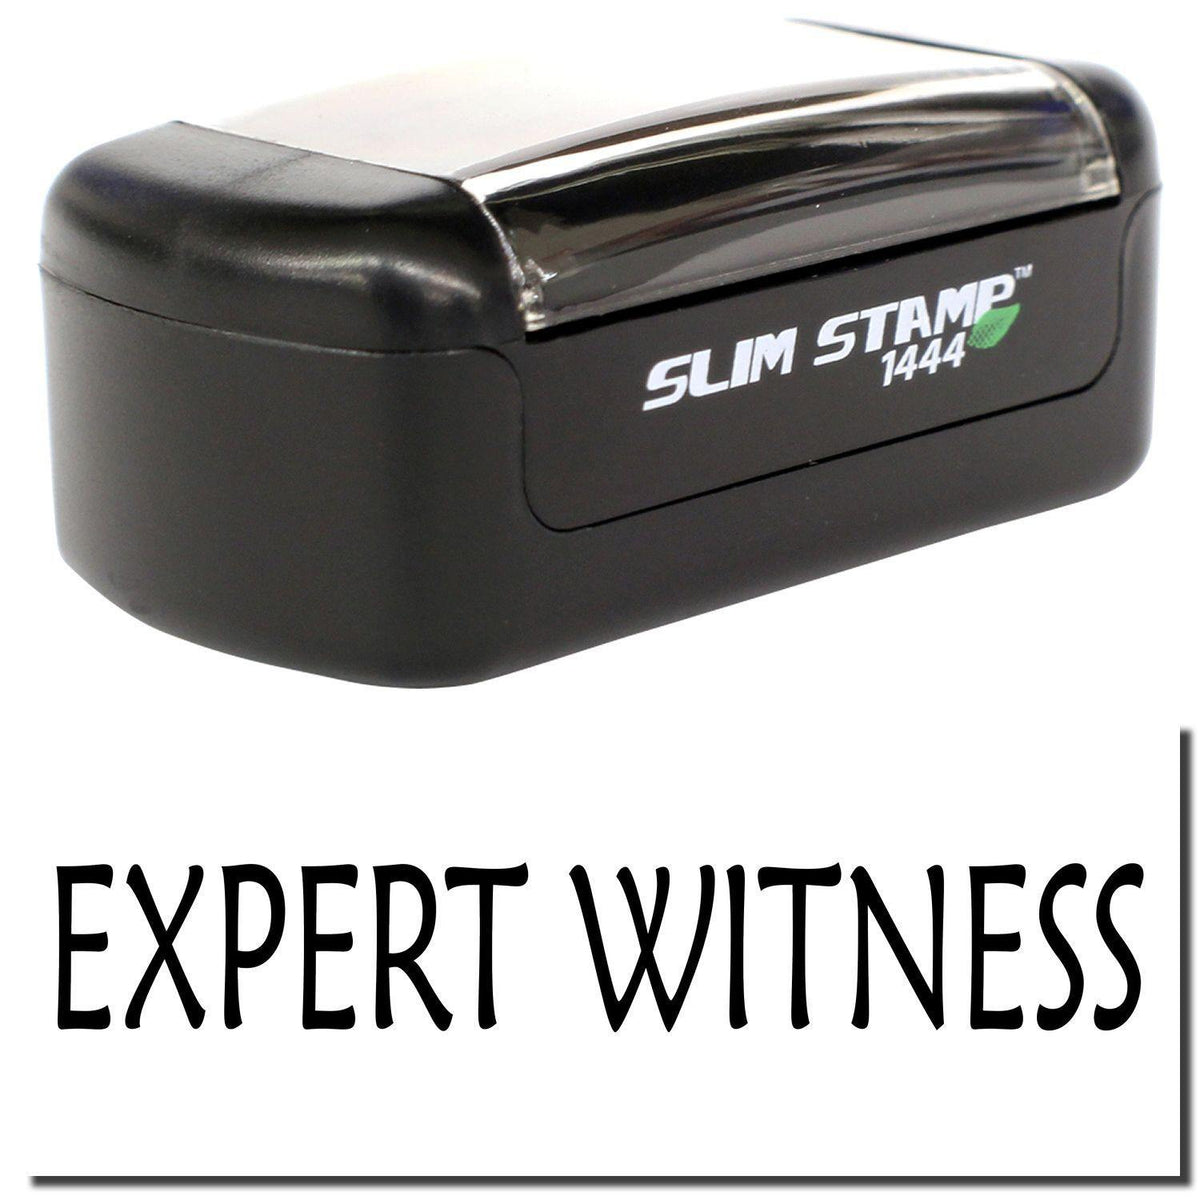 A stock office pre-inked stamp with a stamped image showing how the text &quot;EXPERT WITNESS&quot; is displayed after stamping.